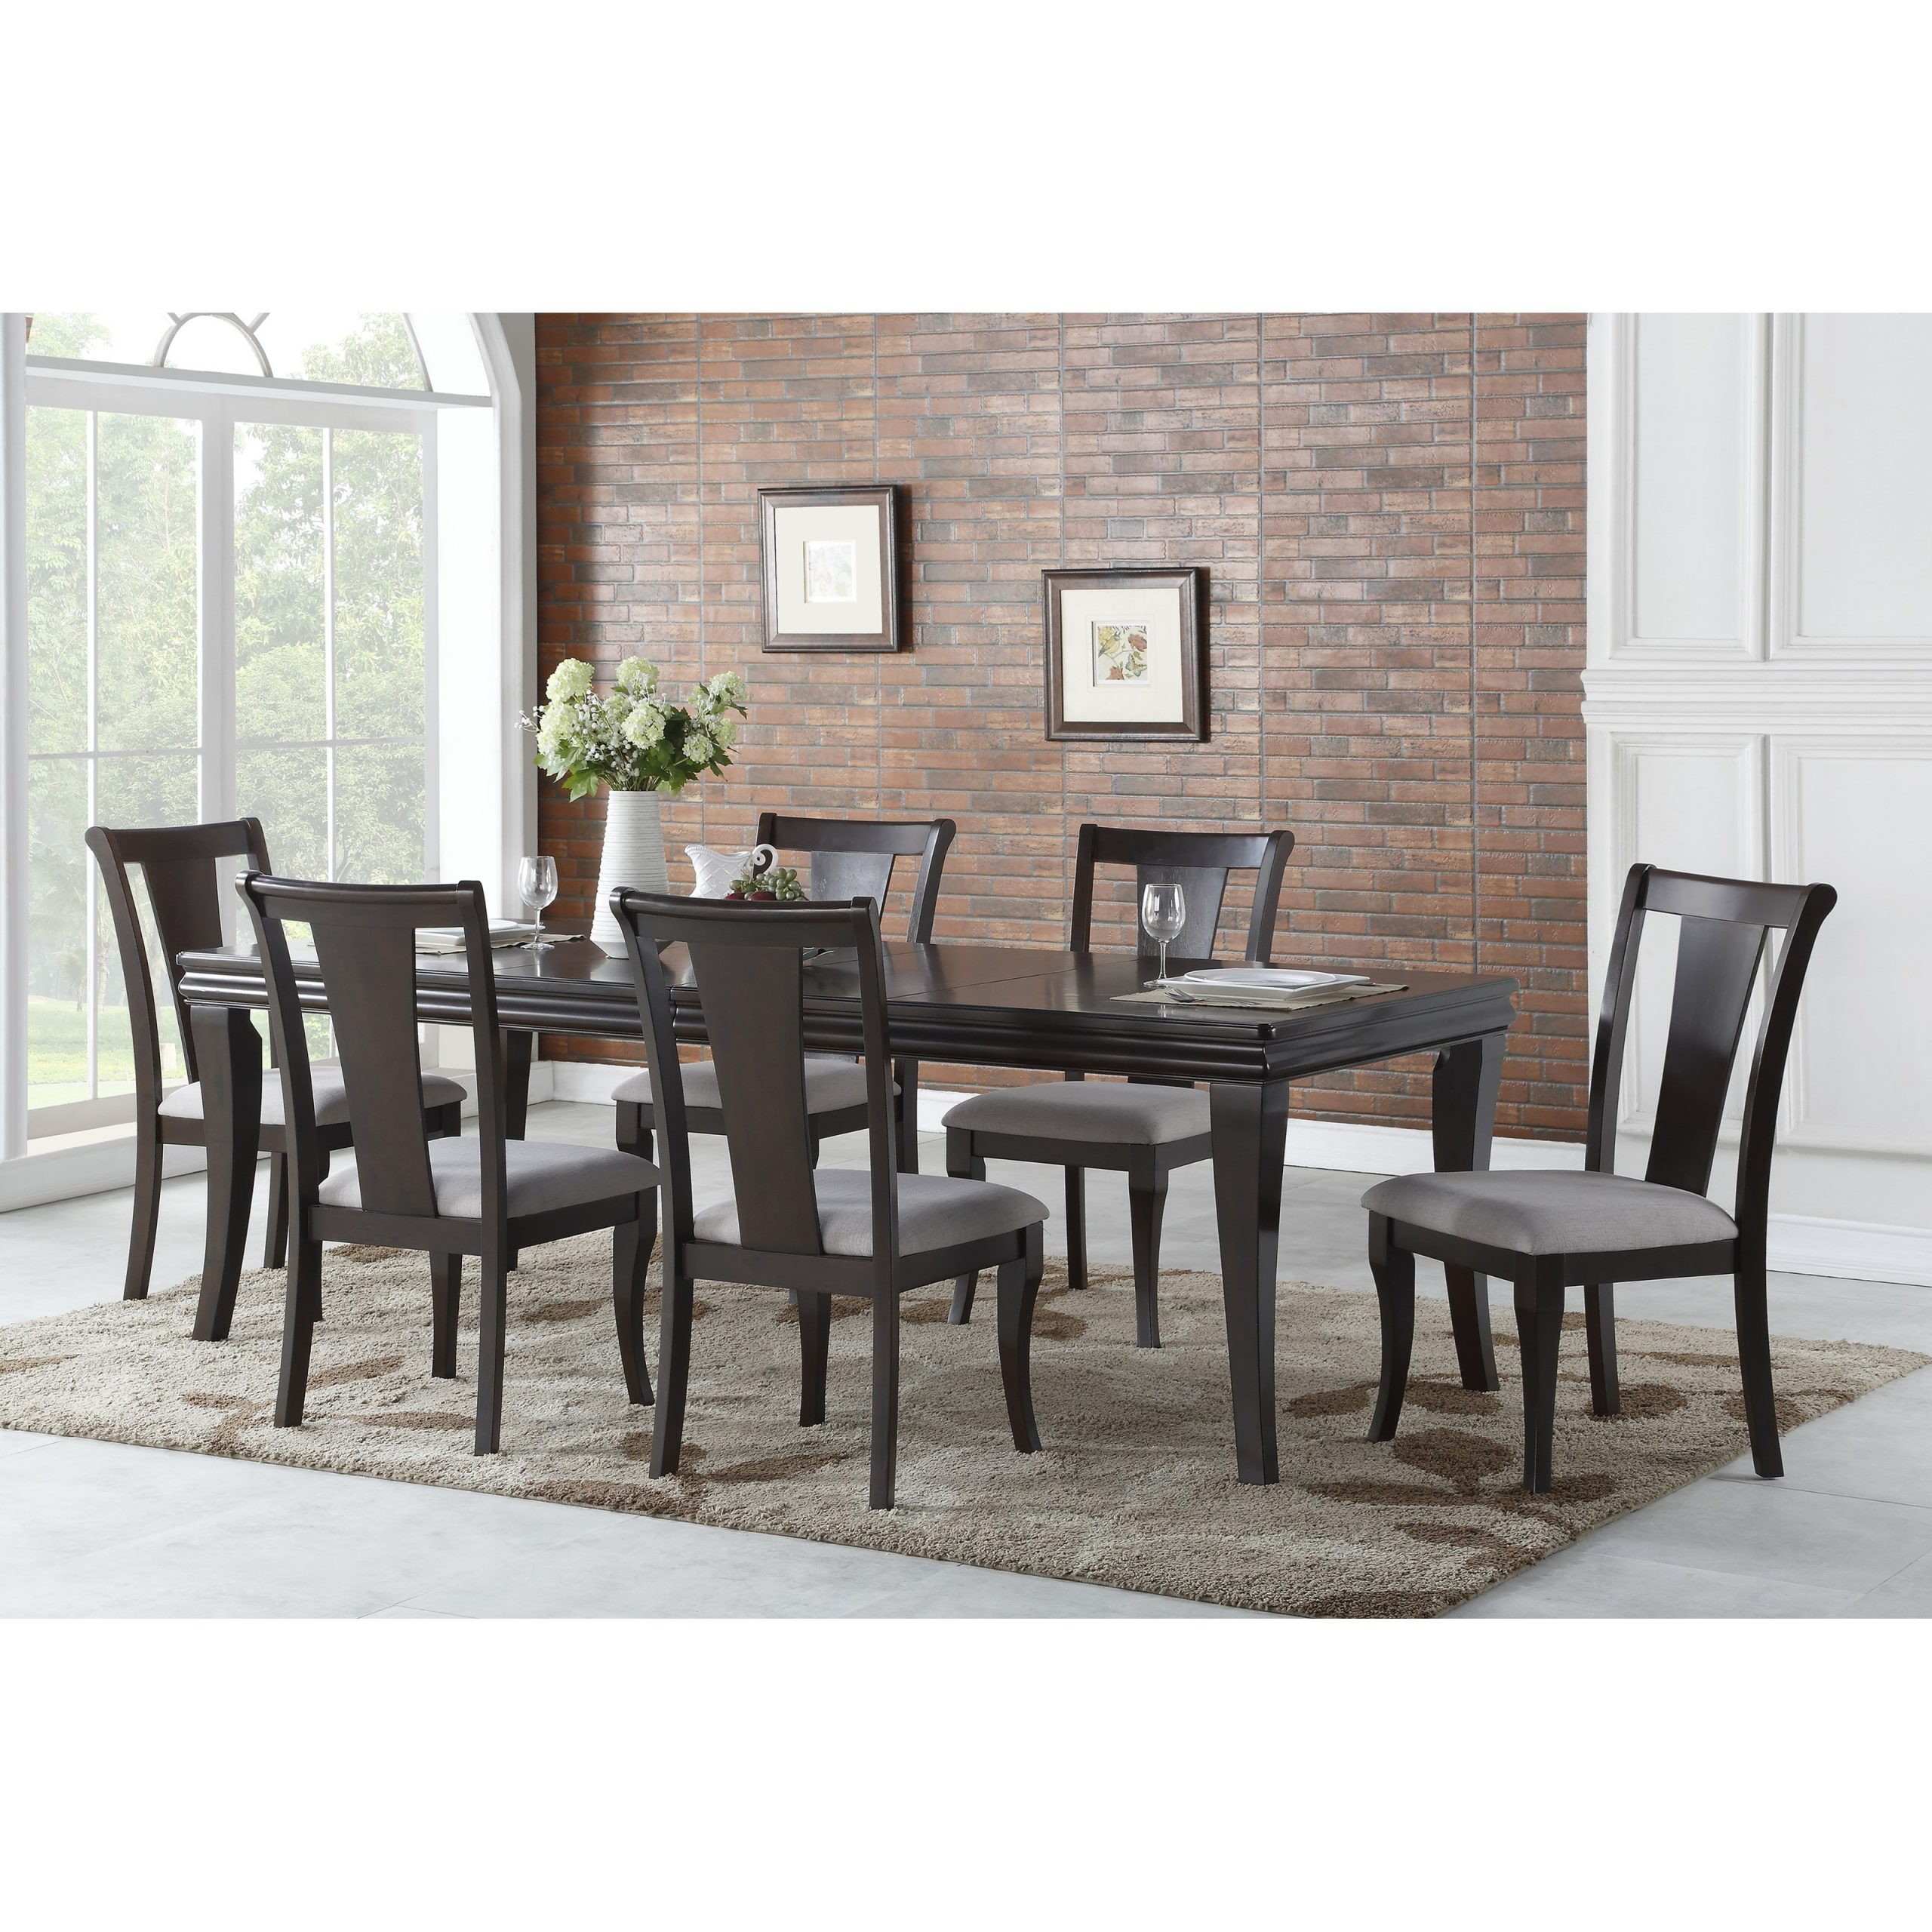 Steve Silver Aubrey Transitional Dining Room Set Northeast with regard to proportions 3200 X 3200